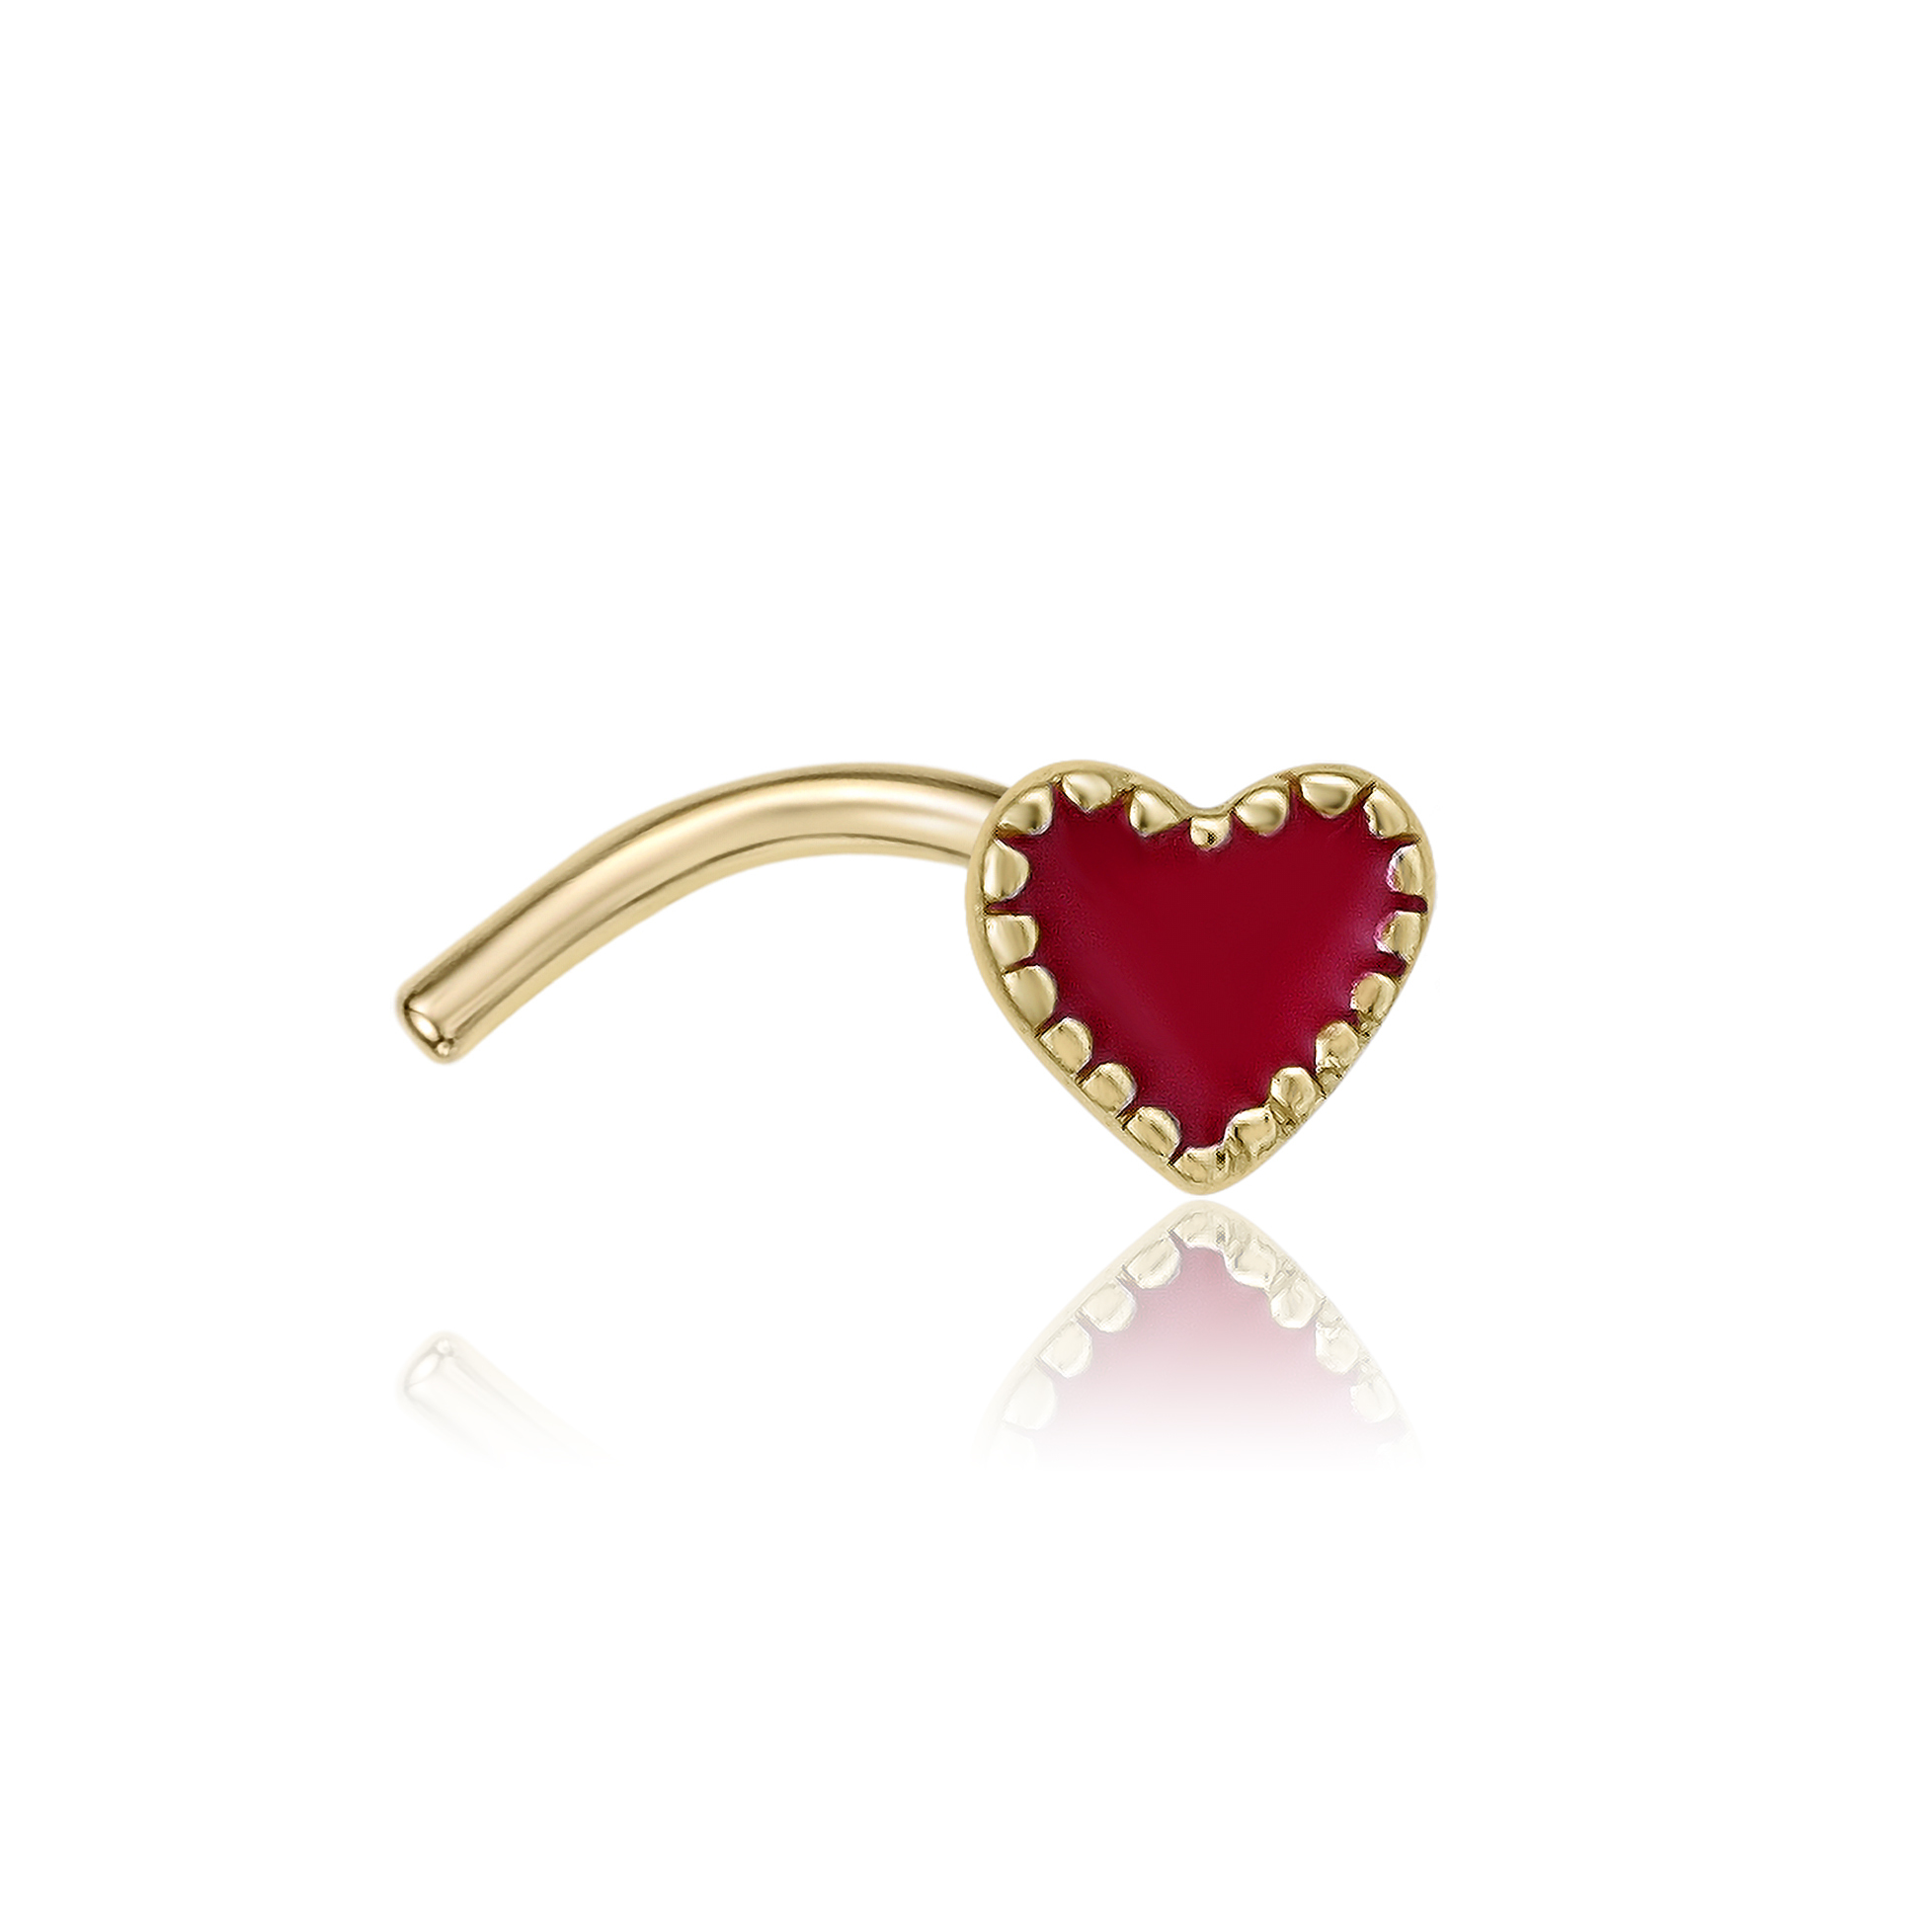 Lavari Jewelers Women's 3.8 MM Red Enamel Heart Curved Nose Ring, 14K Yellow Gold, 20 Gauge